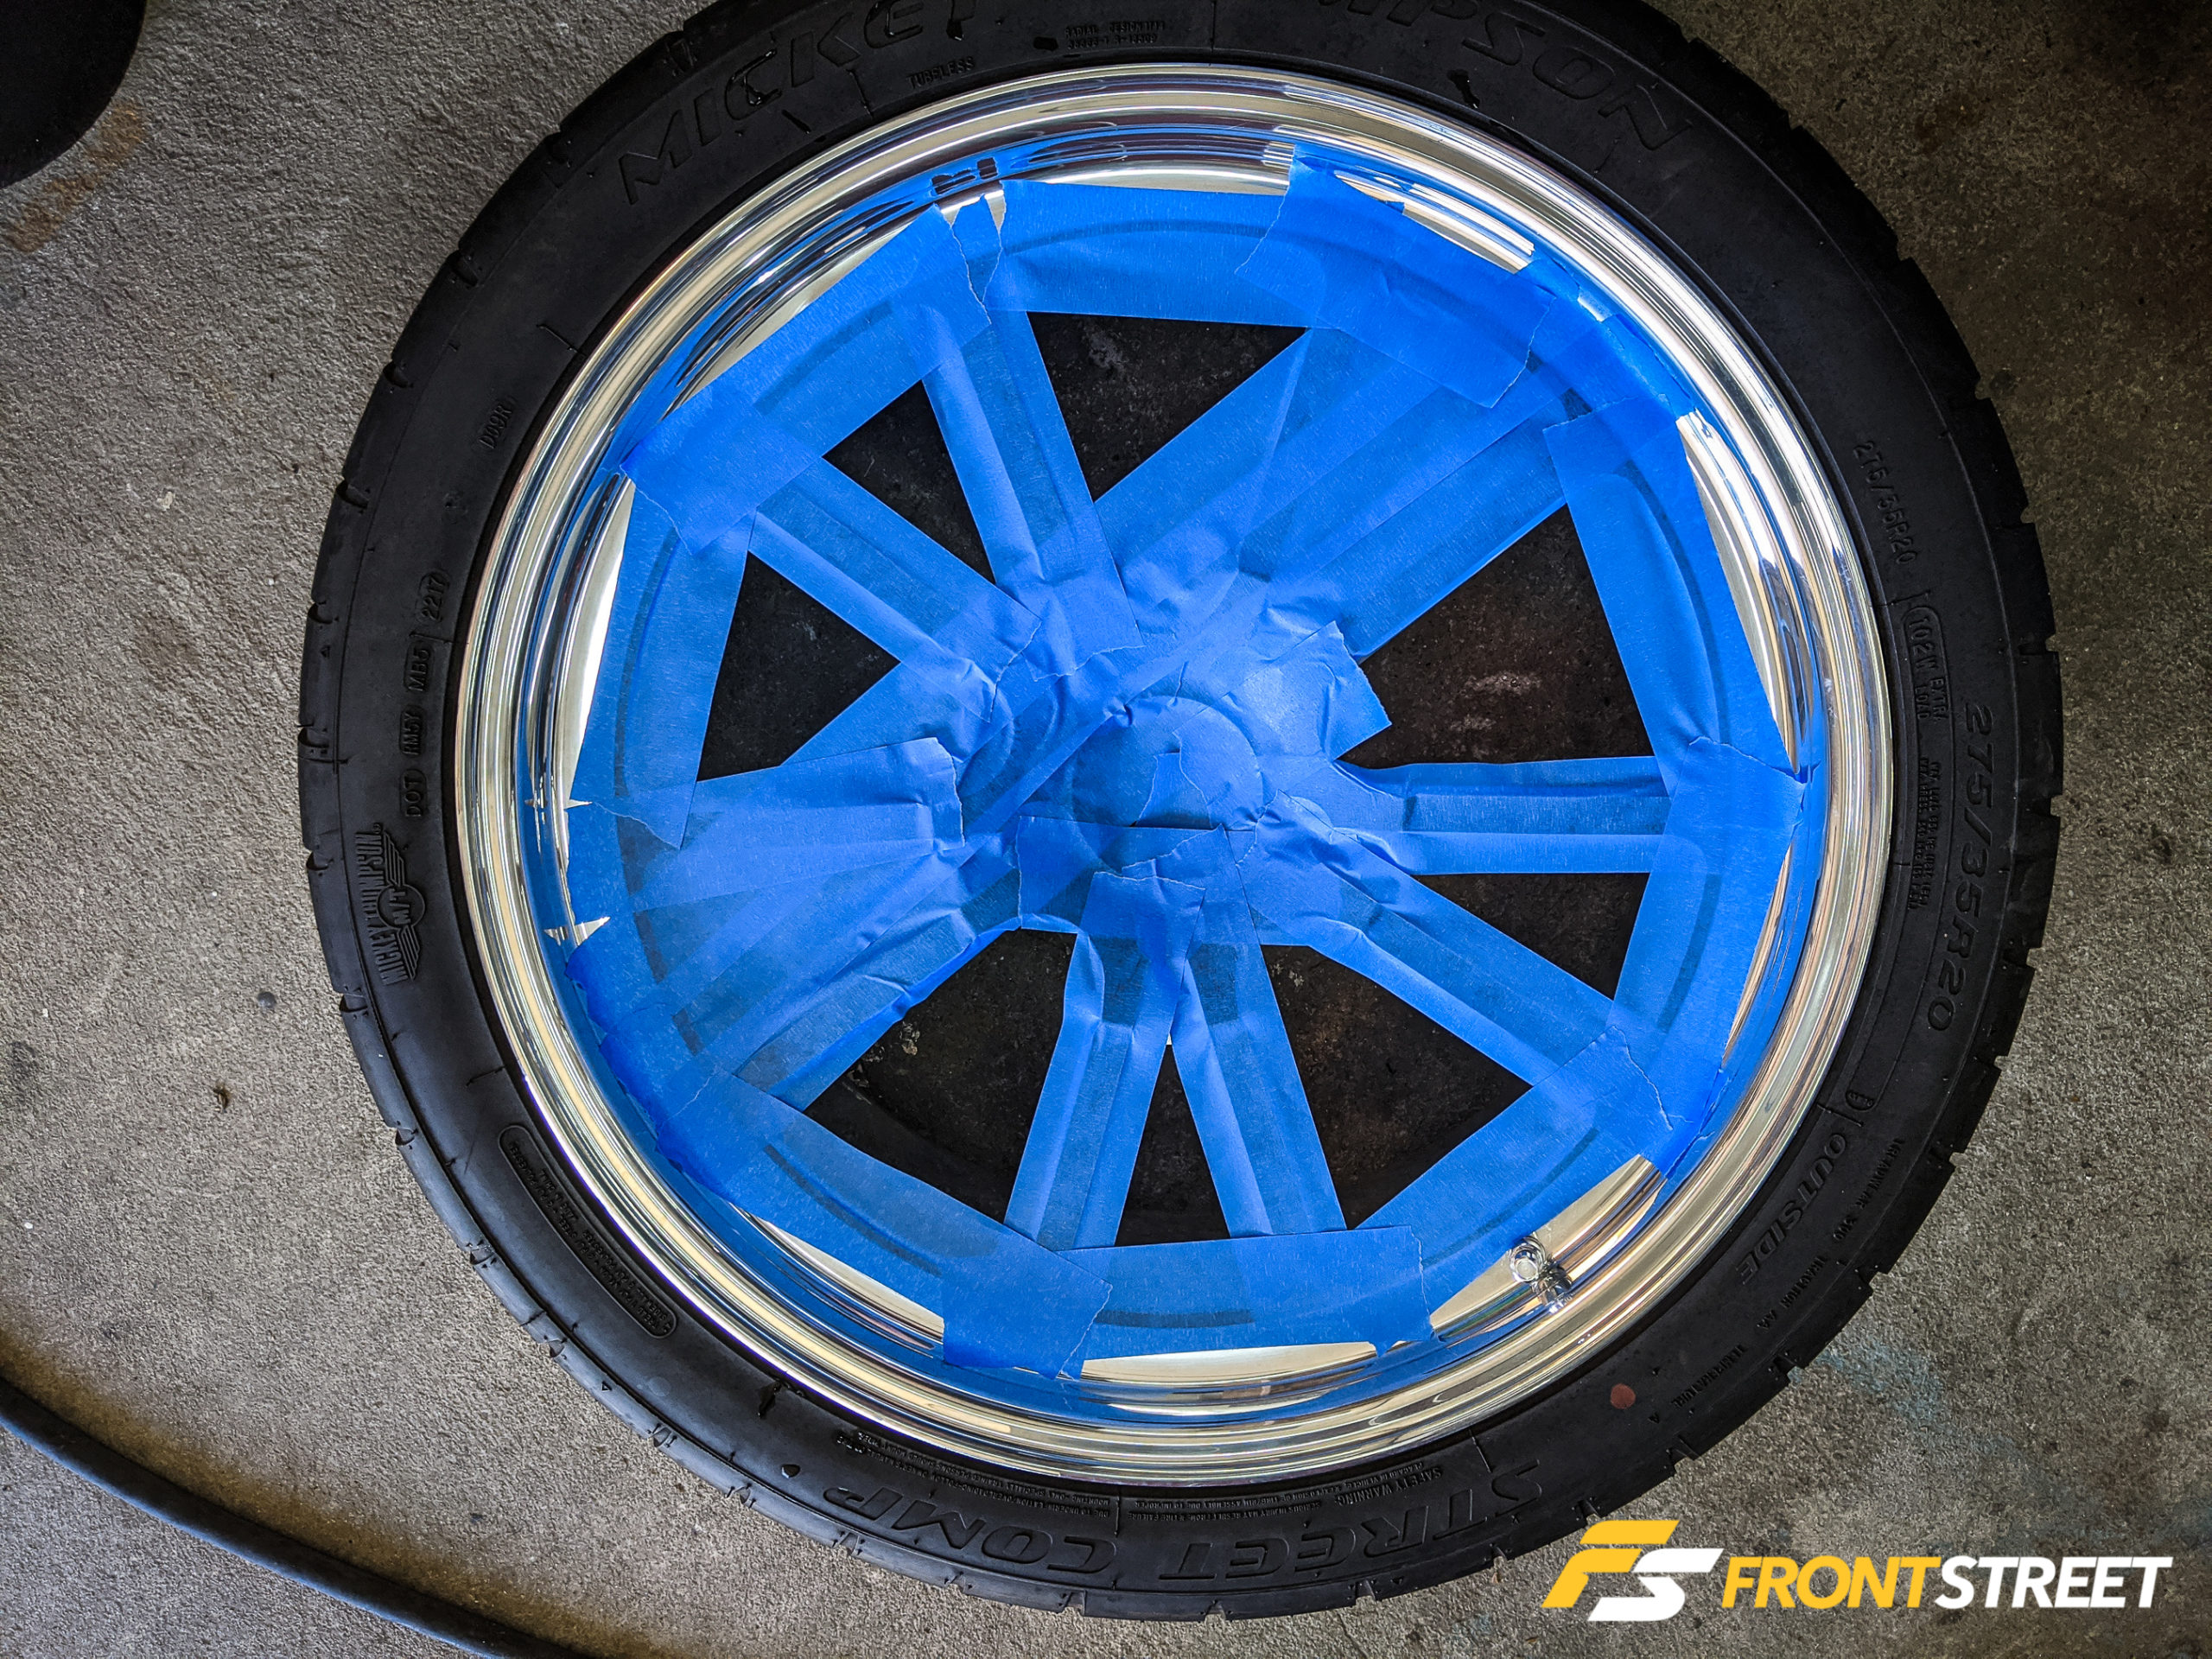 A Beginner’s Guide To Aluminum Wheel Polishing—Successfully!